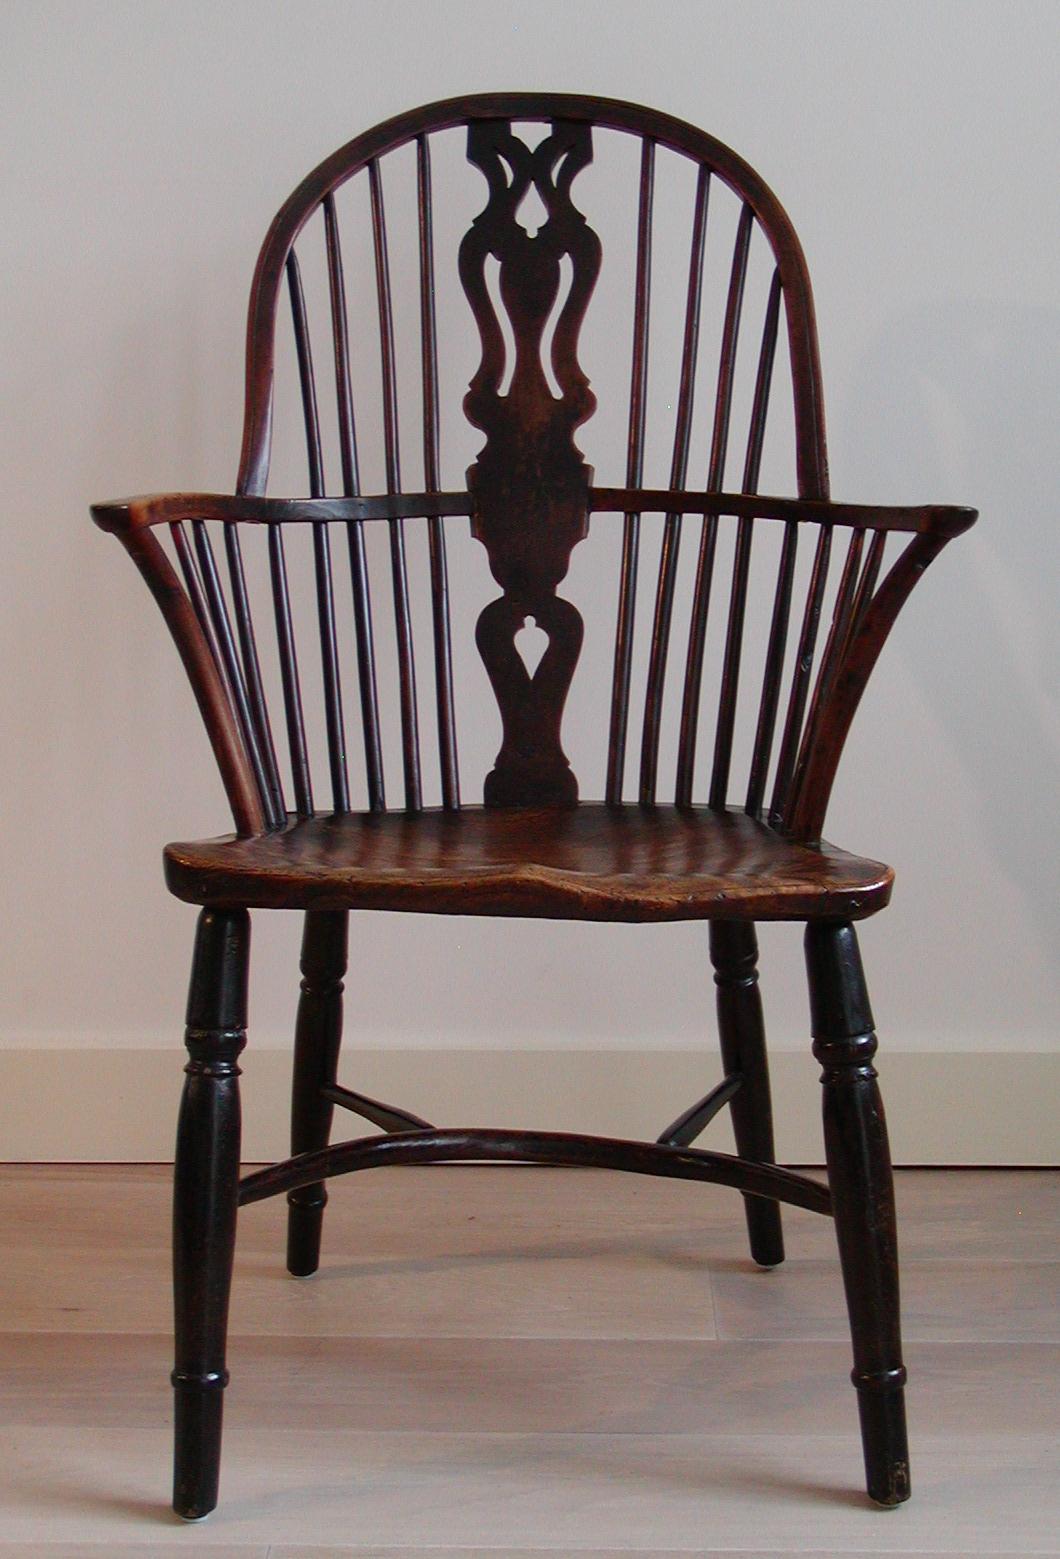 Antique English Georgian High Windsor Armchair, the contoured saddle seat with a rich grained elm, the rest crafted from yew, turned baluster legs joined by a crinoline stretcher, a large and well detailed pierced-shaped back splat, splayed out arms